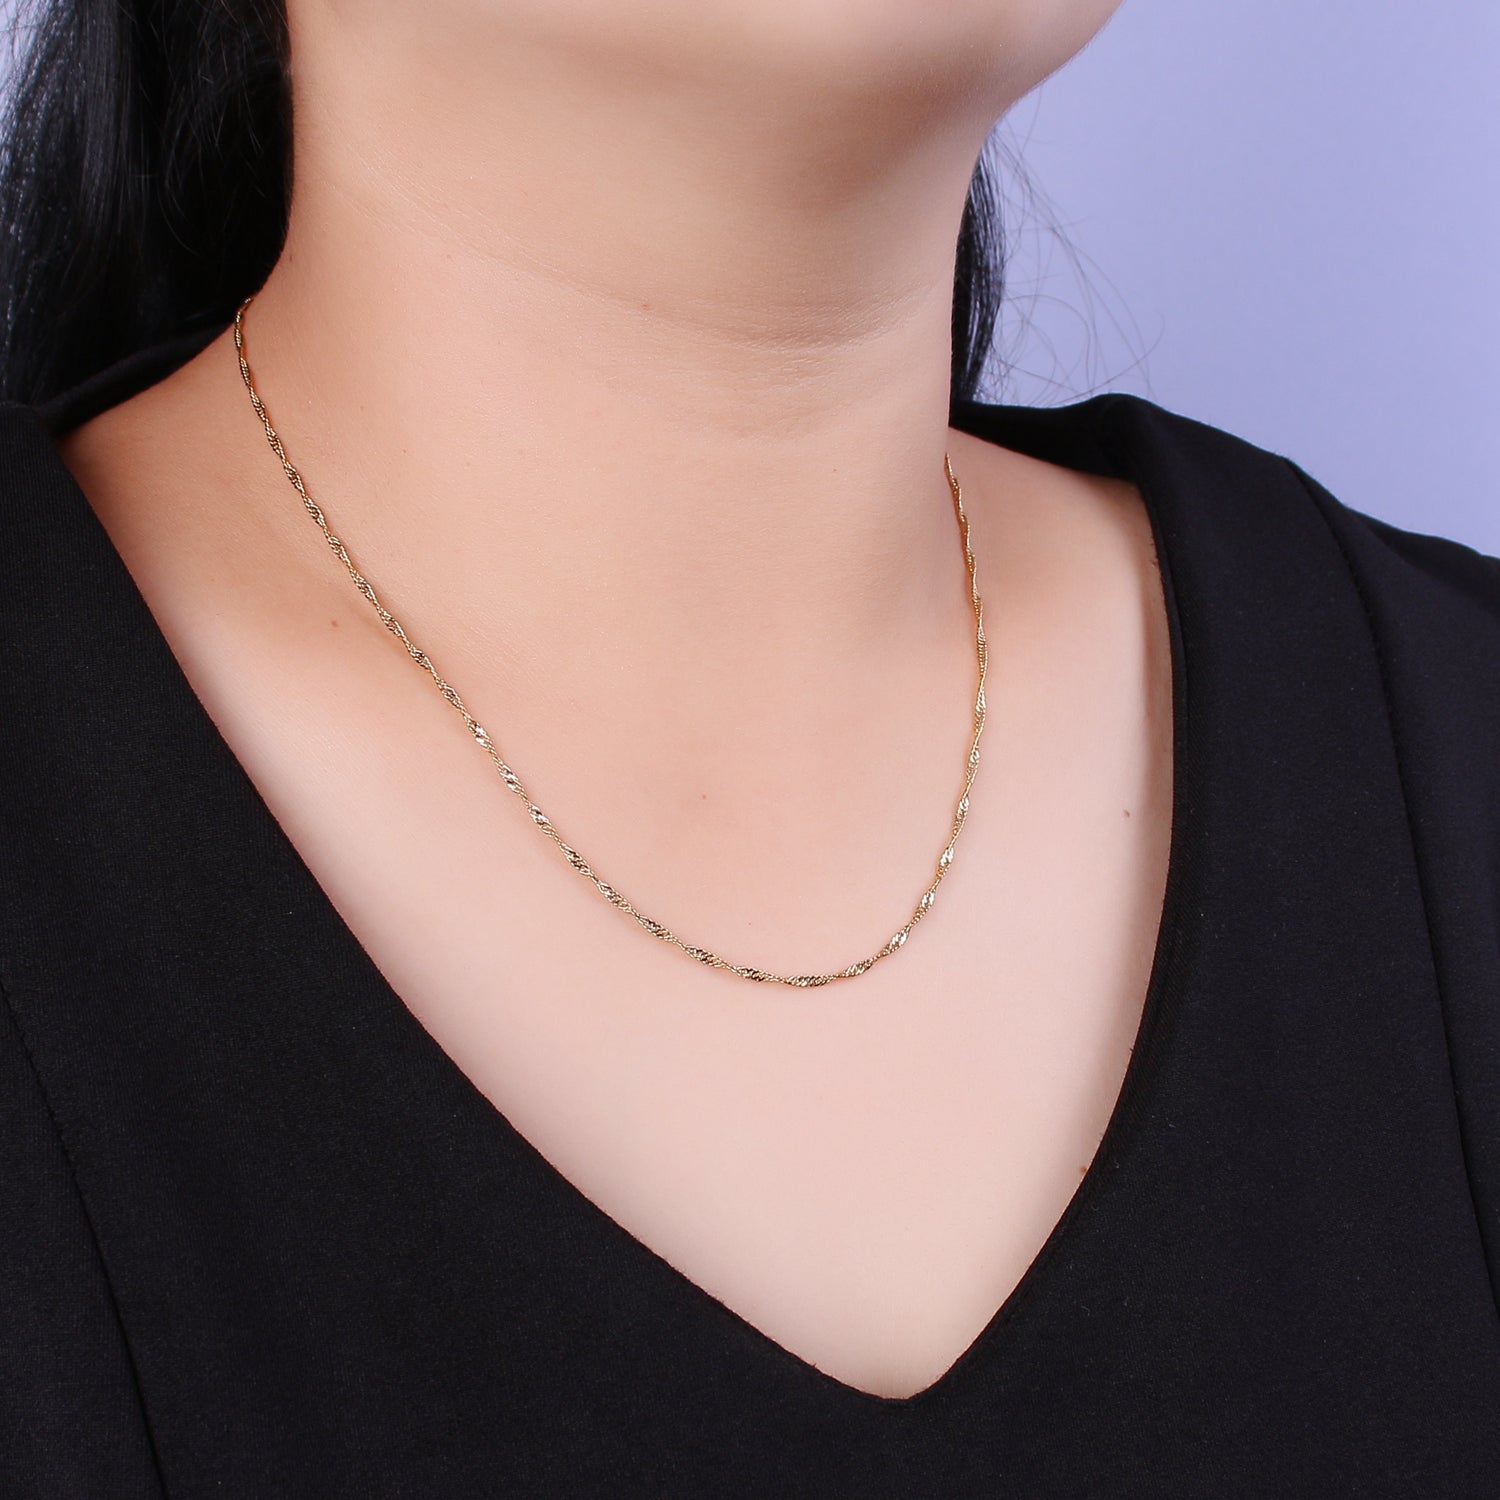 18K Gold Filled Singapore Chain Necklace, 1.5mm In Width, Ready To Wear Silver Twist Chain Necklace 18 inch - DLUXCA